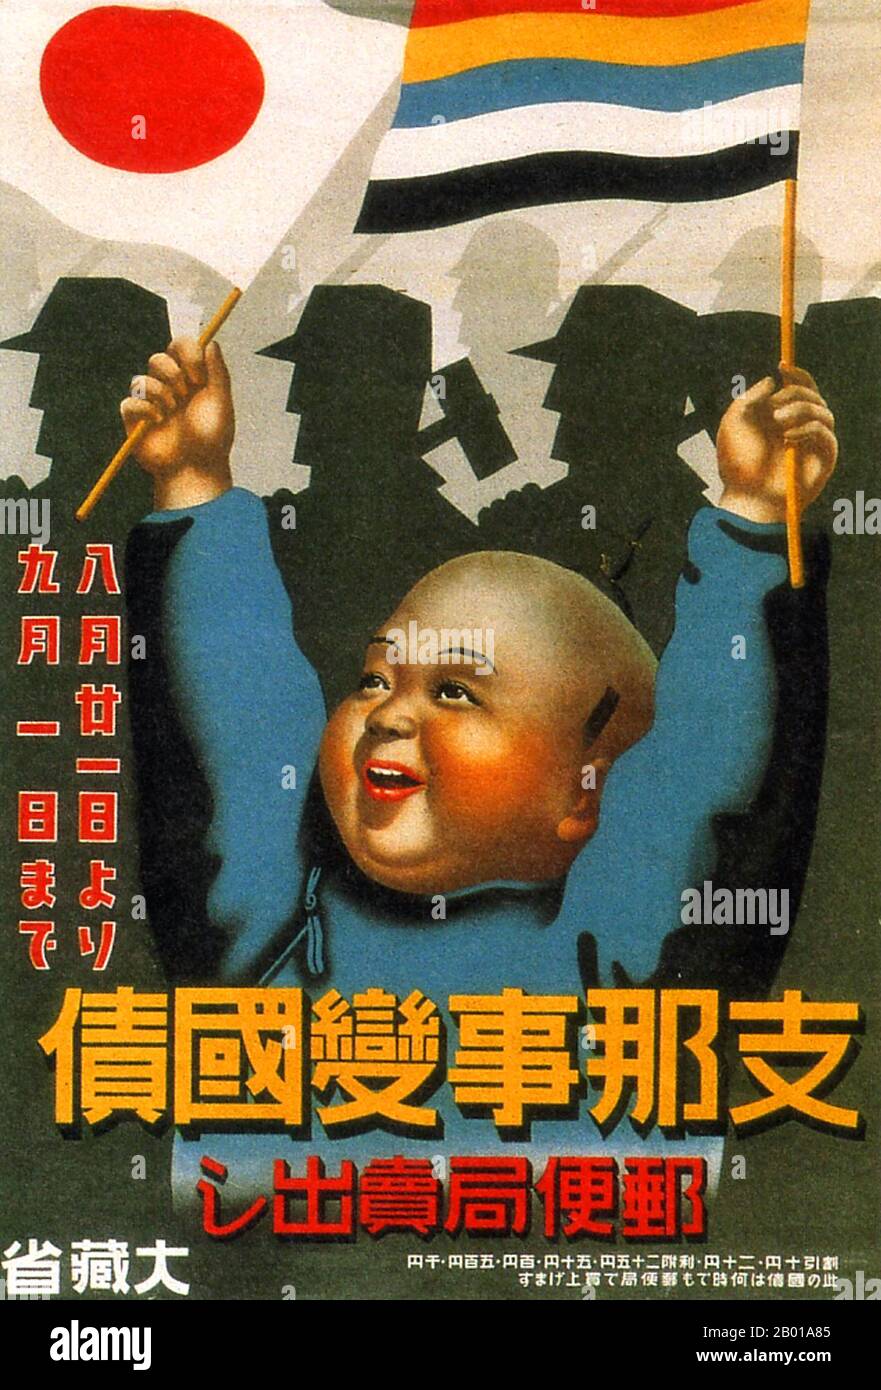 Japan: National Bonds for the Sino-Japanese War, Ministry of Finance, 1937.  The child waves the flags of Japan and Manchukuo, the Japanese occupied puppet state of Manchuria.  During late 1920s and 1930s Japan, a new poster style developed that reflected the growing influence of the masses in Japanese society. These art posters were strongly influenced by the emerging political forces of Communism and Fascism in Europe and the Soviet Union, adopting a style that incorporated bold slogans with artistic themes ranging from Leftist socialist realism through Stateism. Stock Photo